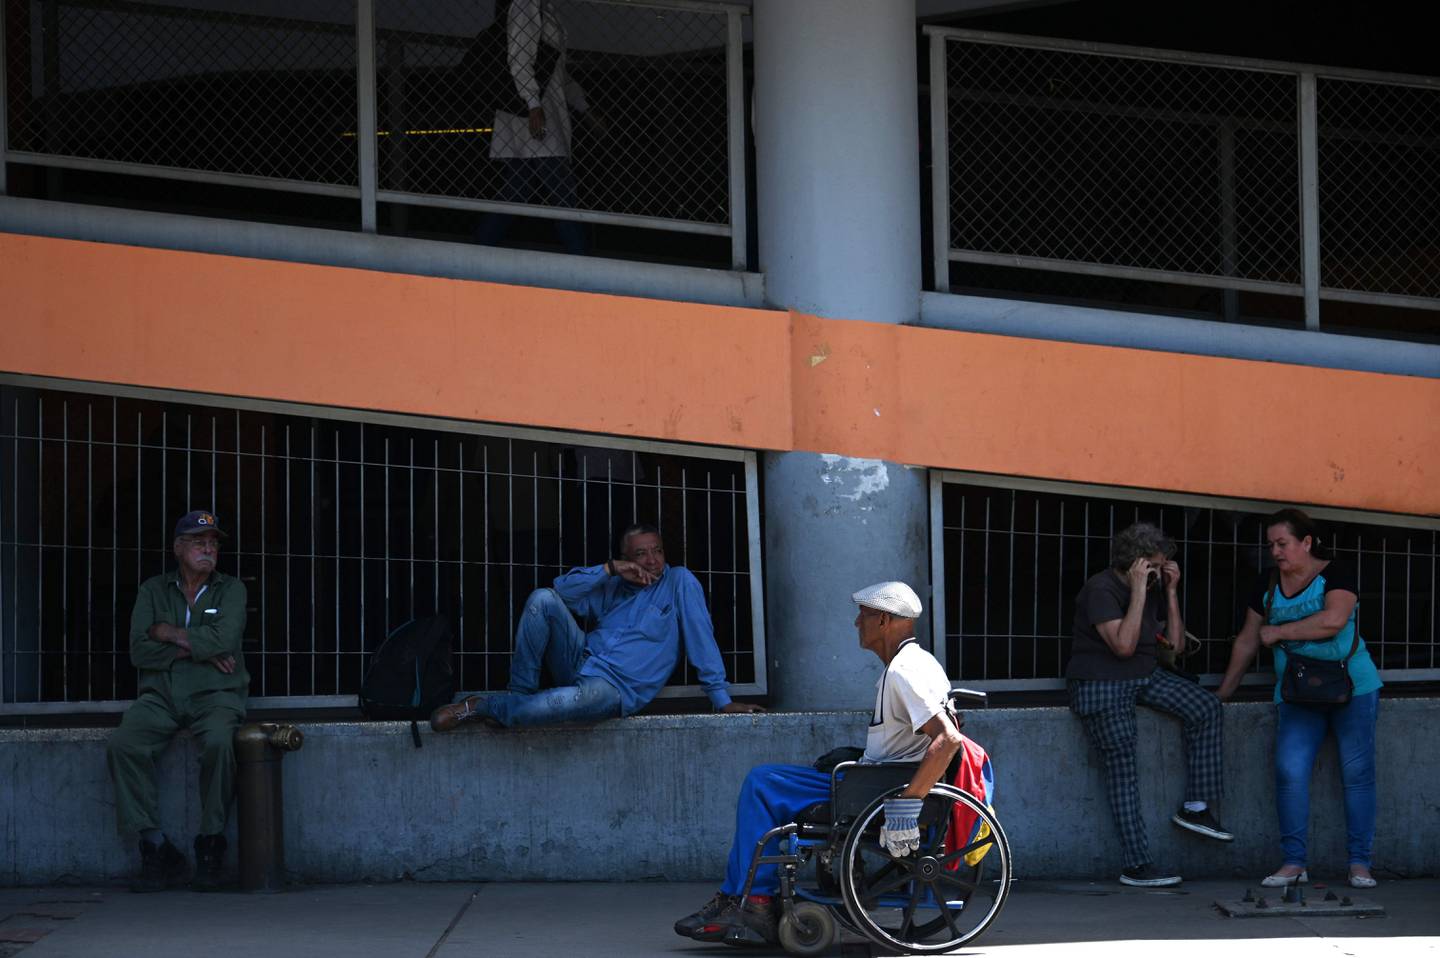 Patients are seen outside the University Hospital in Caracas on May 13, 2019, during a nurses demo. - Members of the Board of Directors of the Nursing School of the capital district demonstrated to make public their critical work situation and to demand Venezuelan President Nicolas Maduro for explanations on the whereabouts of humanitarian aid. (Photo by MARVIN RECINOS / AFP)